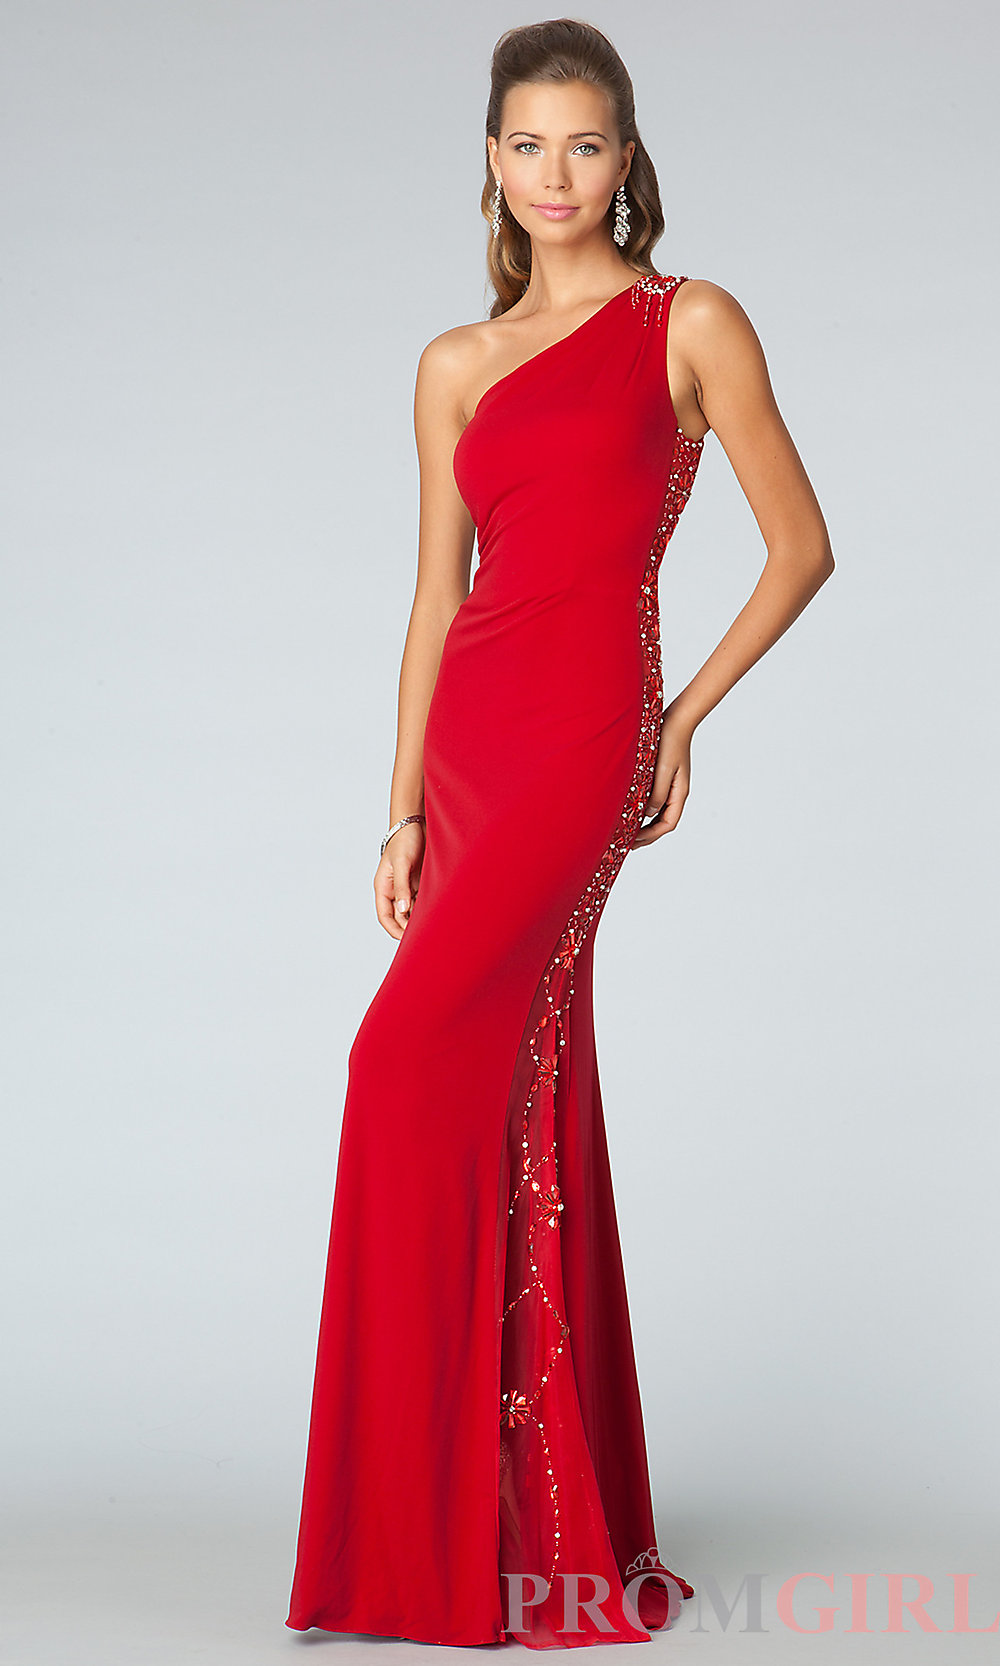 Latest Fancy Gowns, Prom and Cocktail dresses for Weddings and Parties 2014-2015 (13)